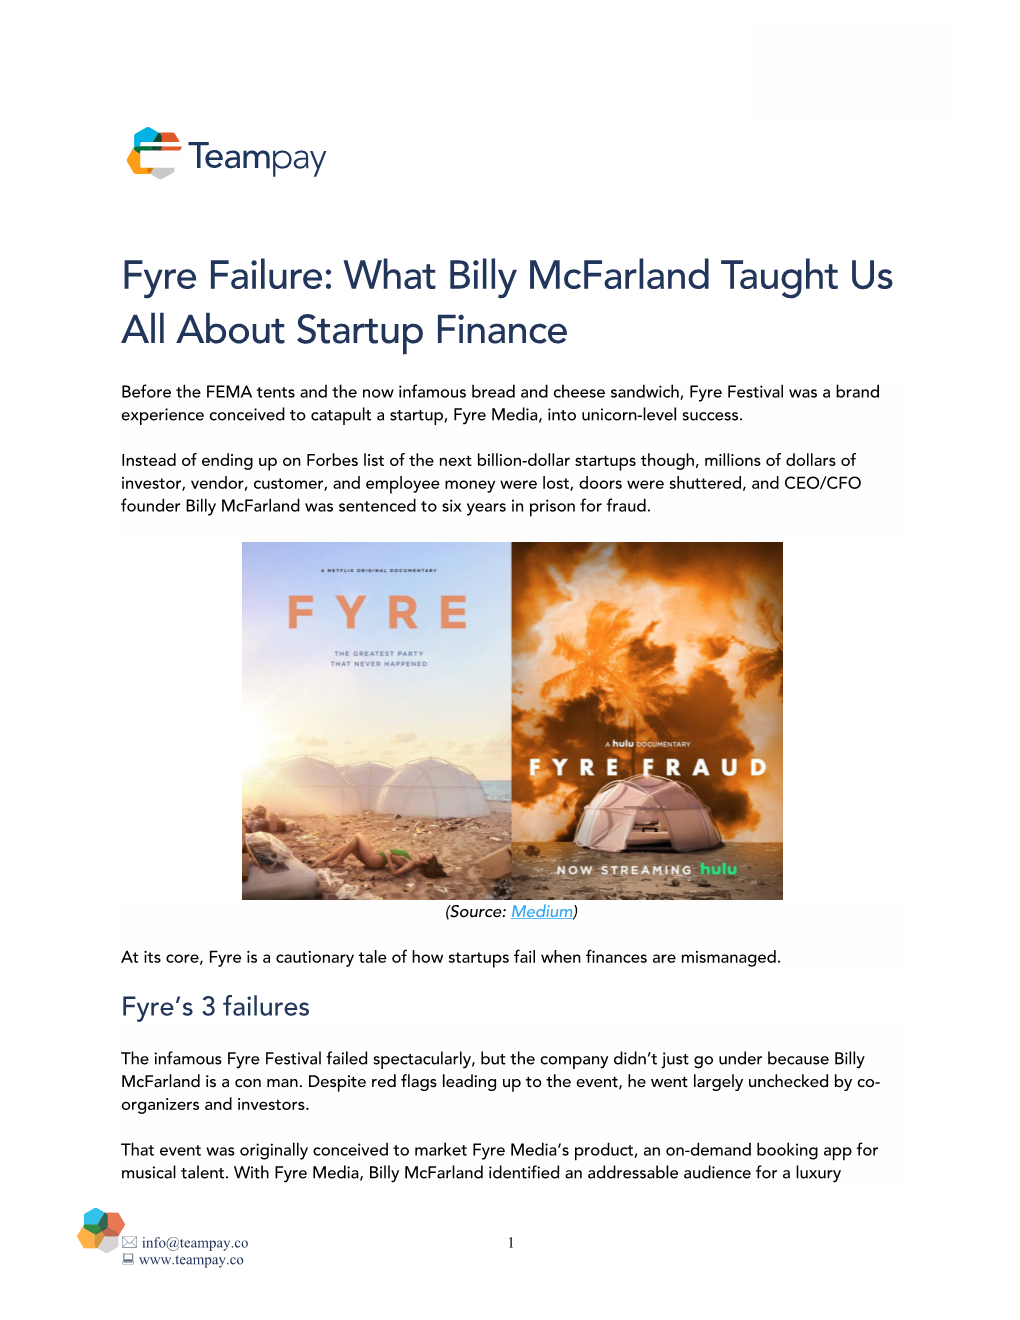 Fyre Failure: What Billy Mcfarland Taught Us All About Startup Finance